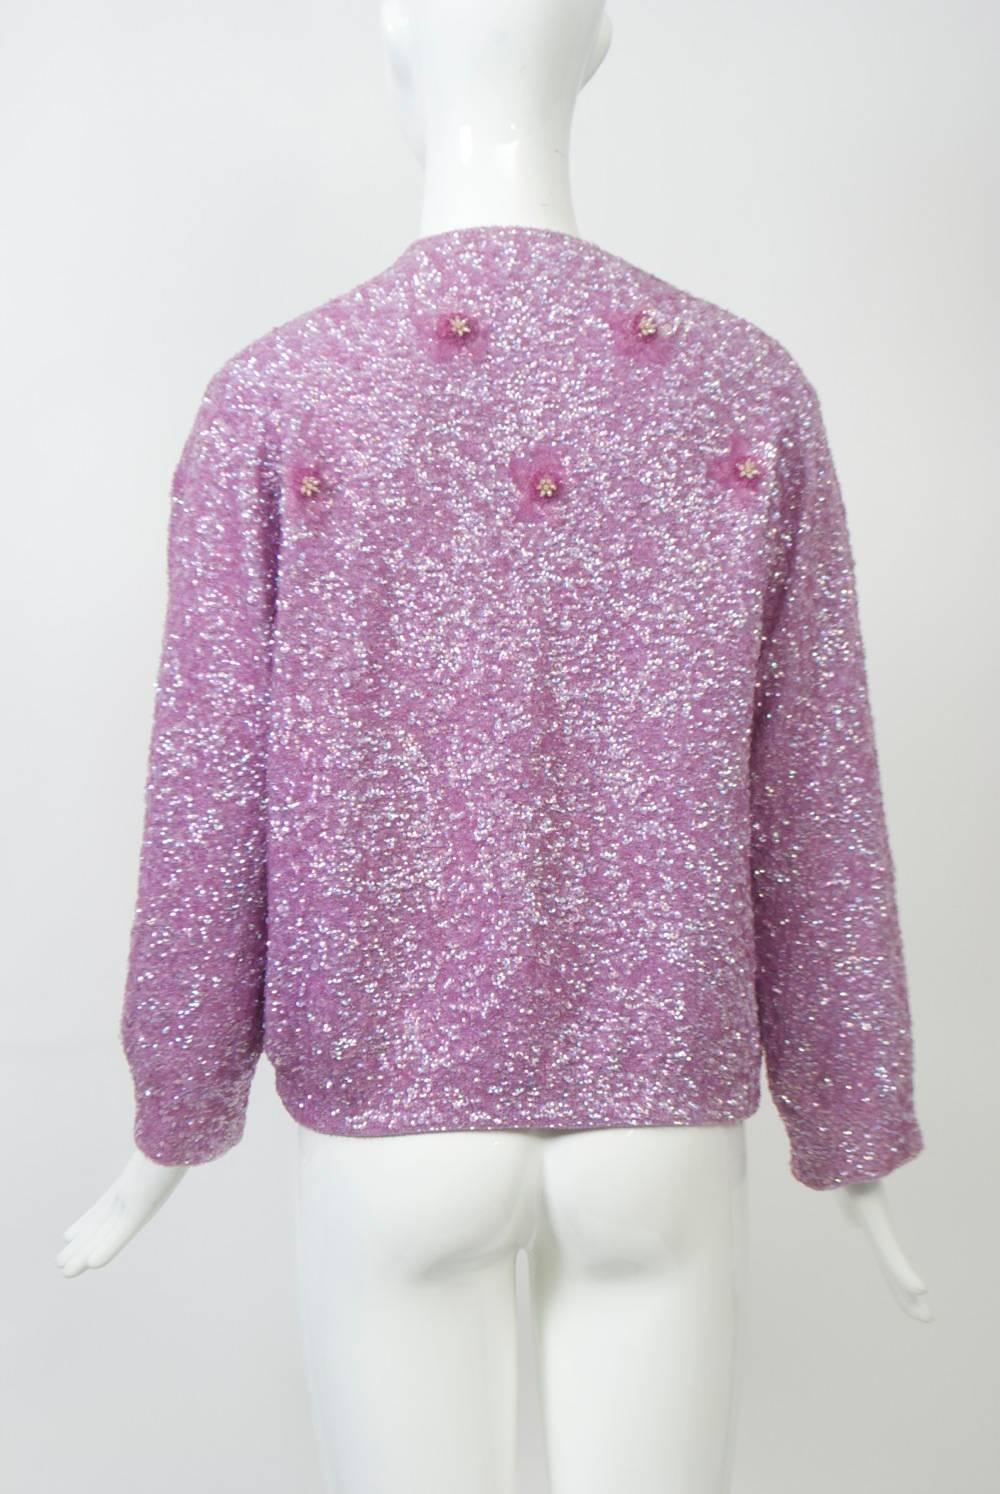 Lavender Sequined Cardigan, Large Size In Excellent Condition For Sale In Alford, MA